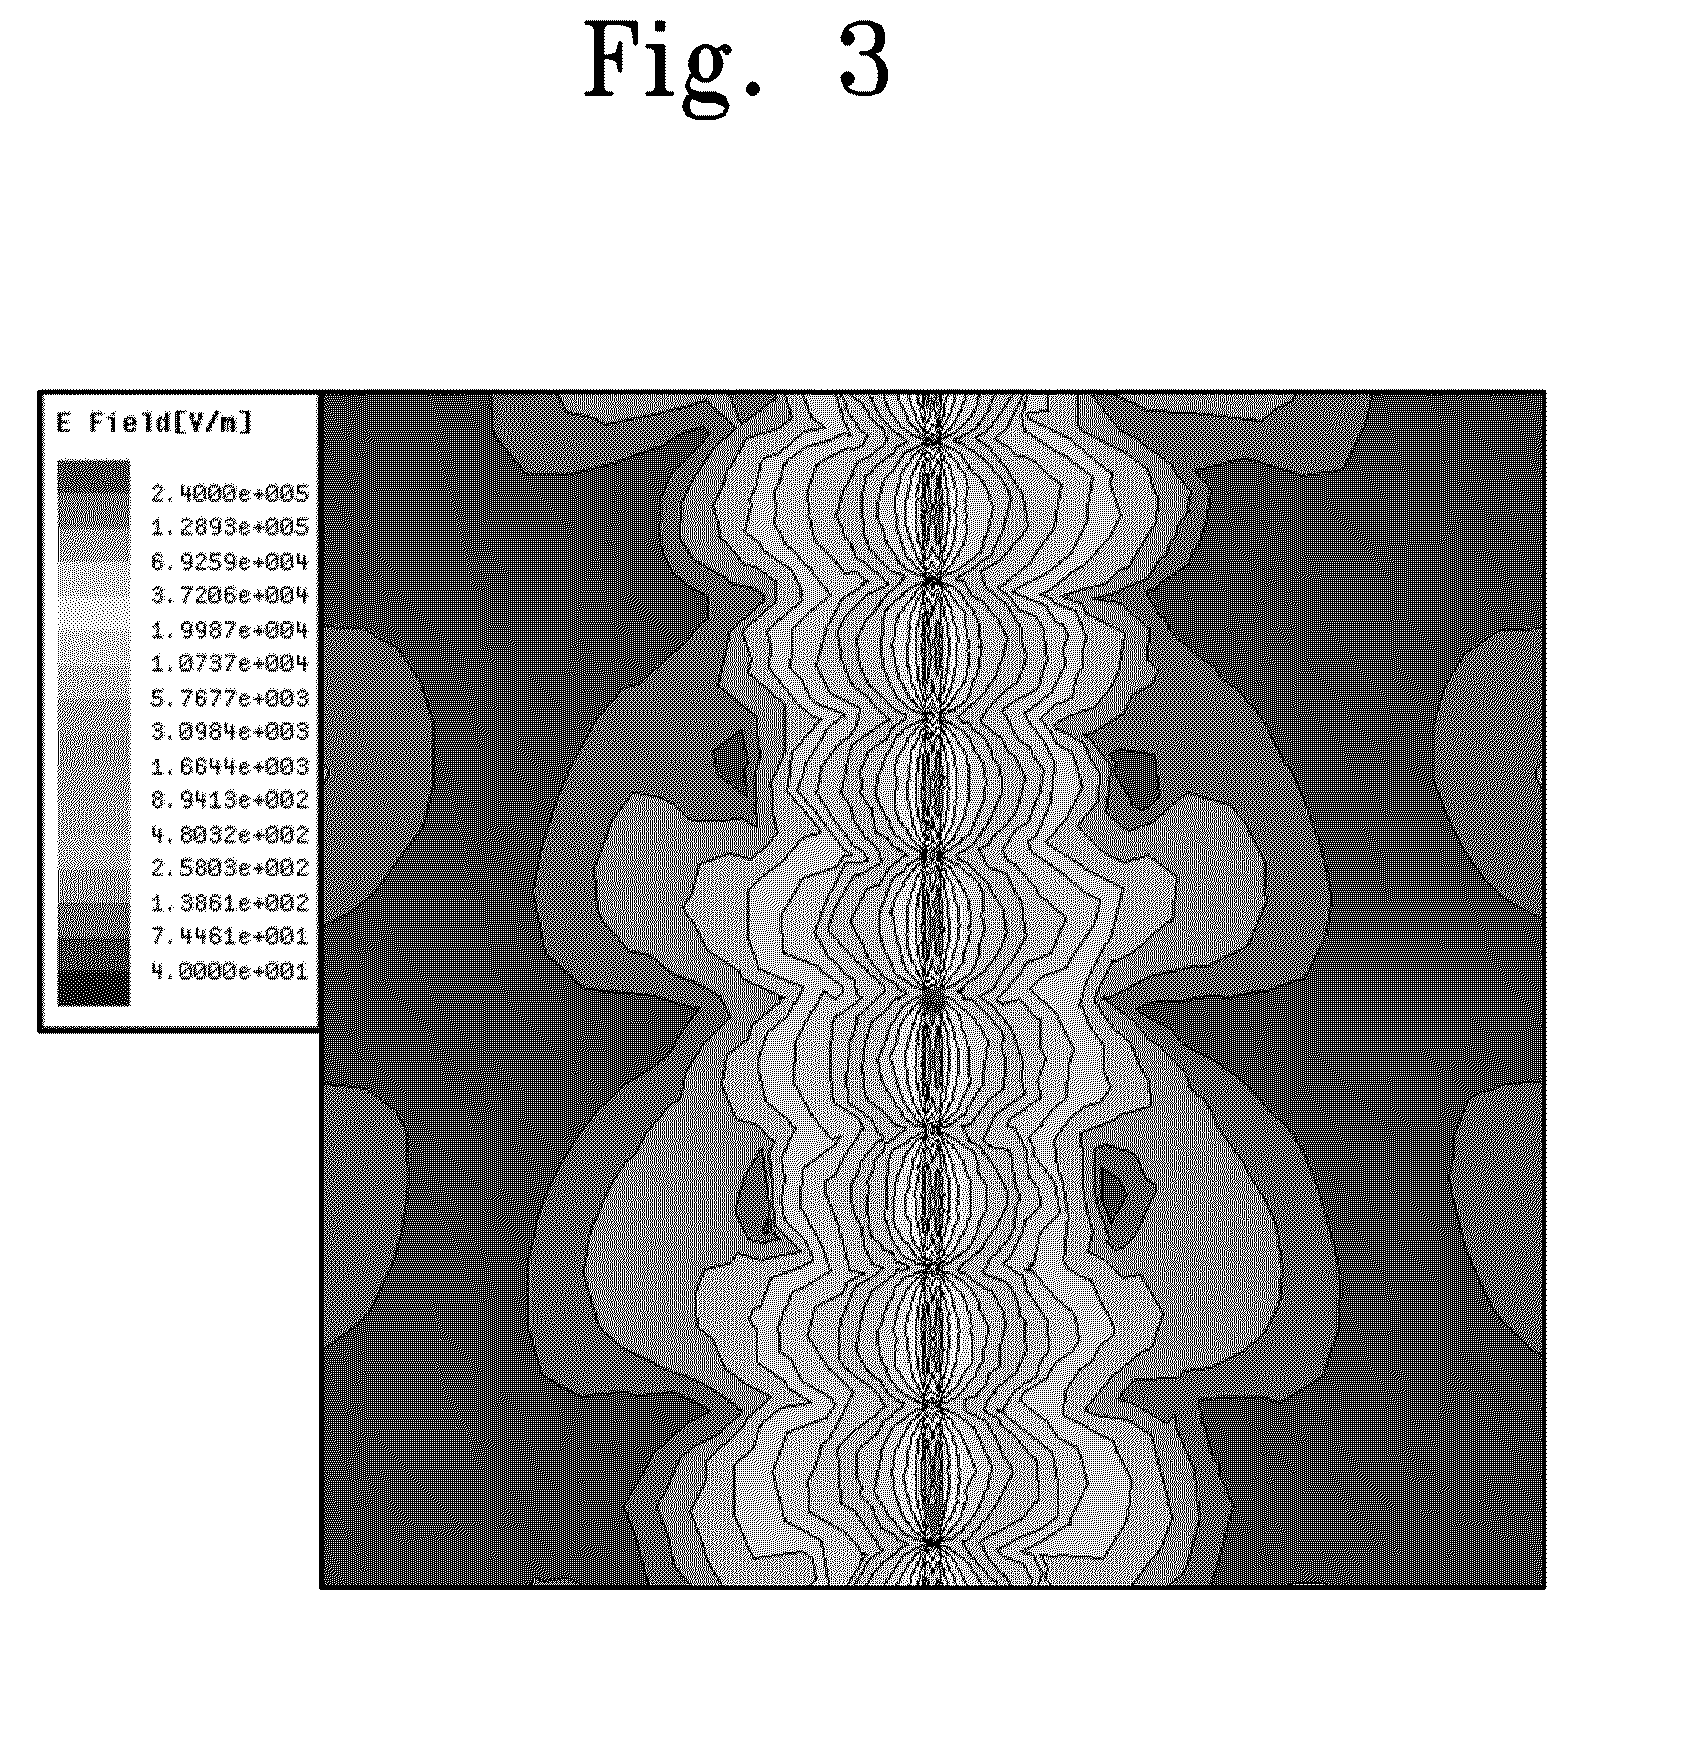 Patch antenna with wide bandwidth at millimeter wave band